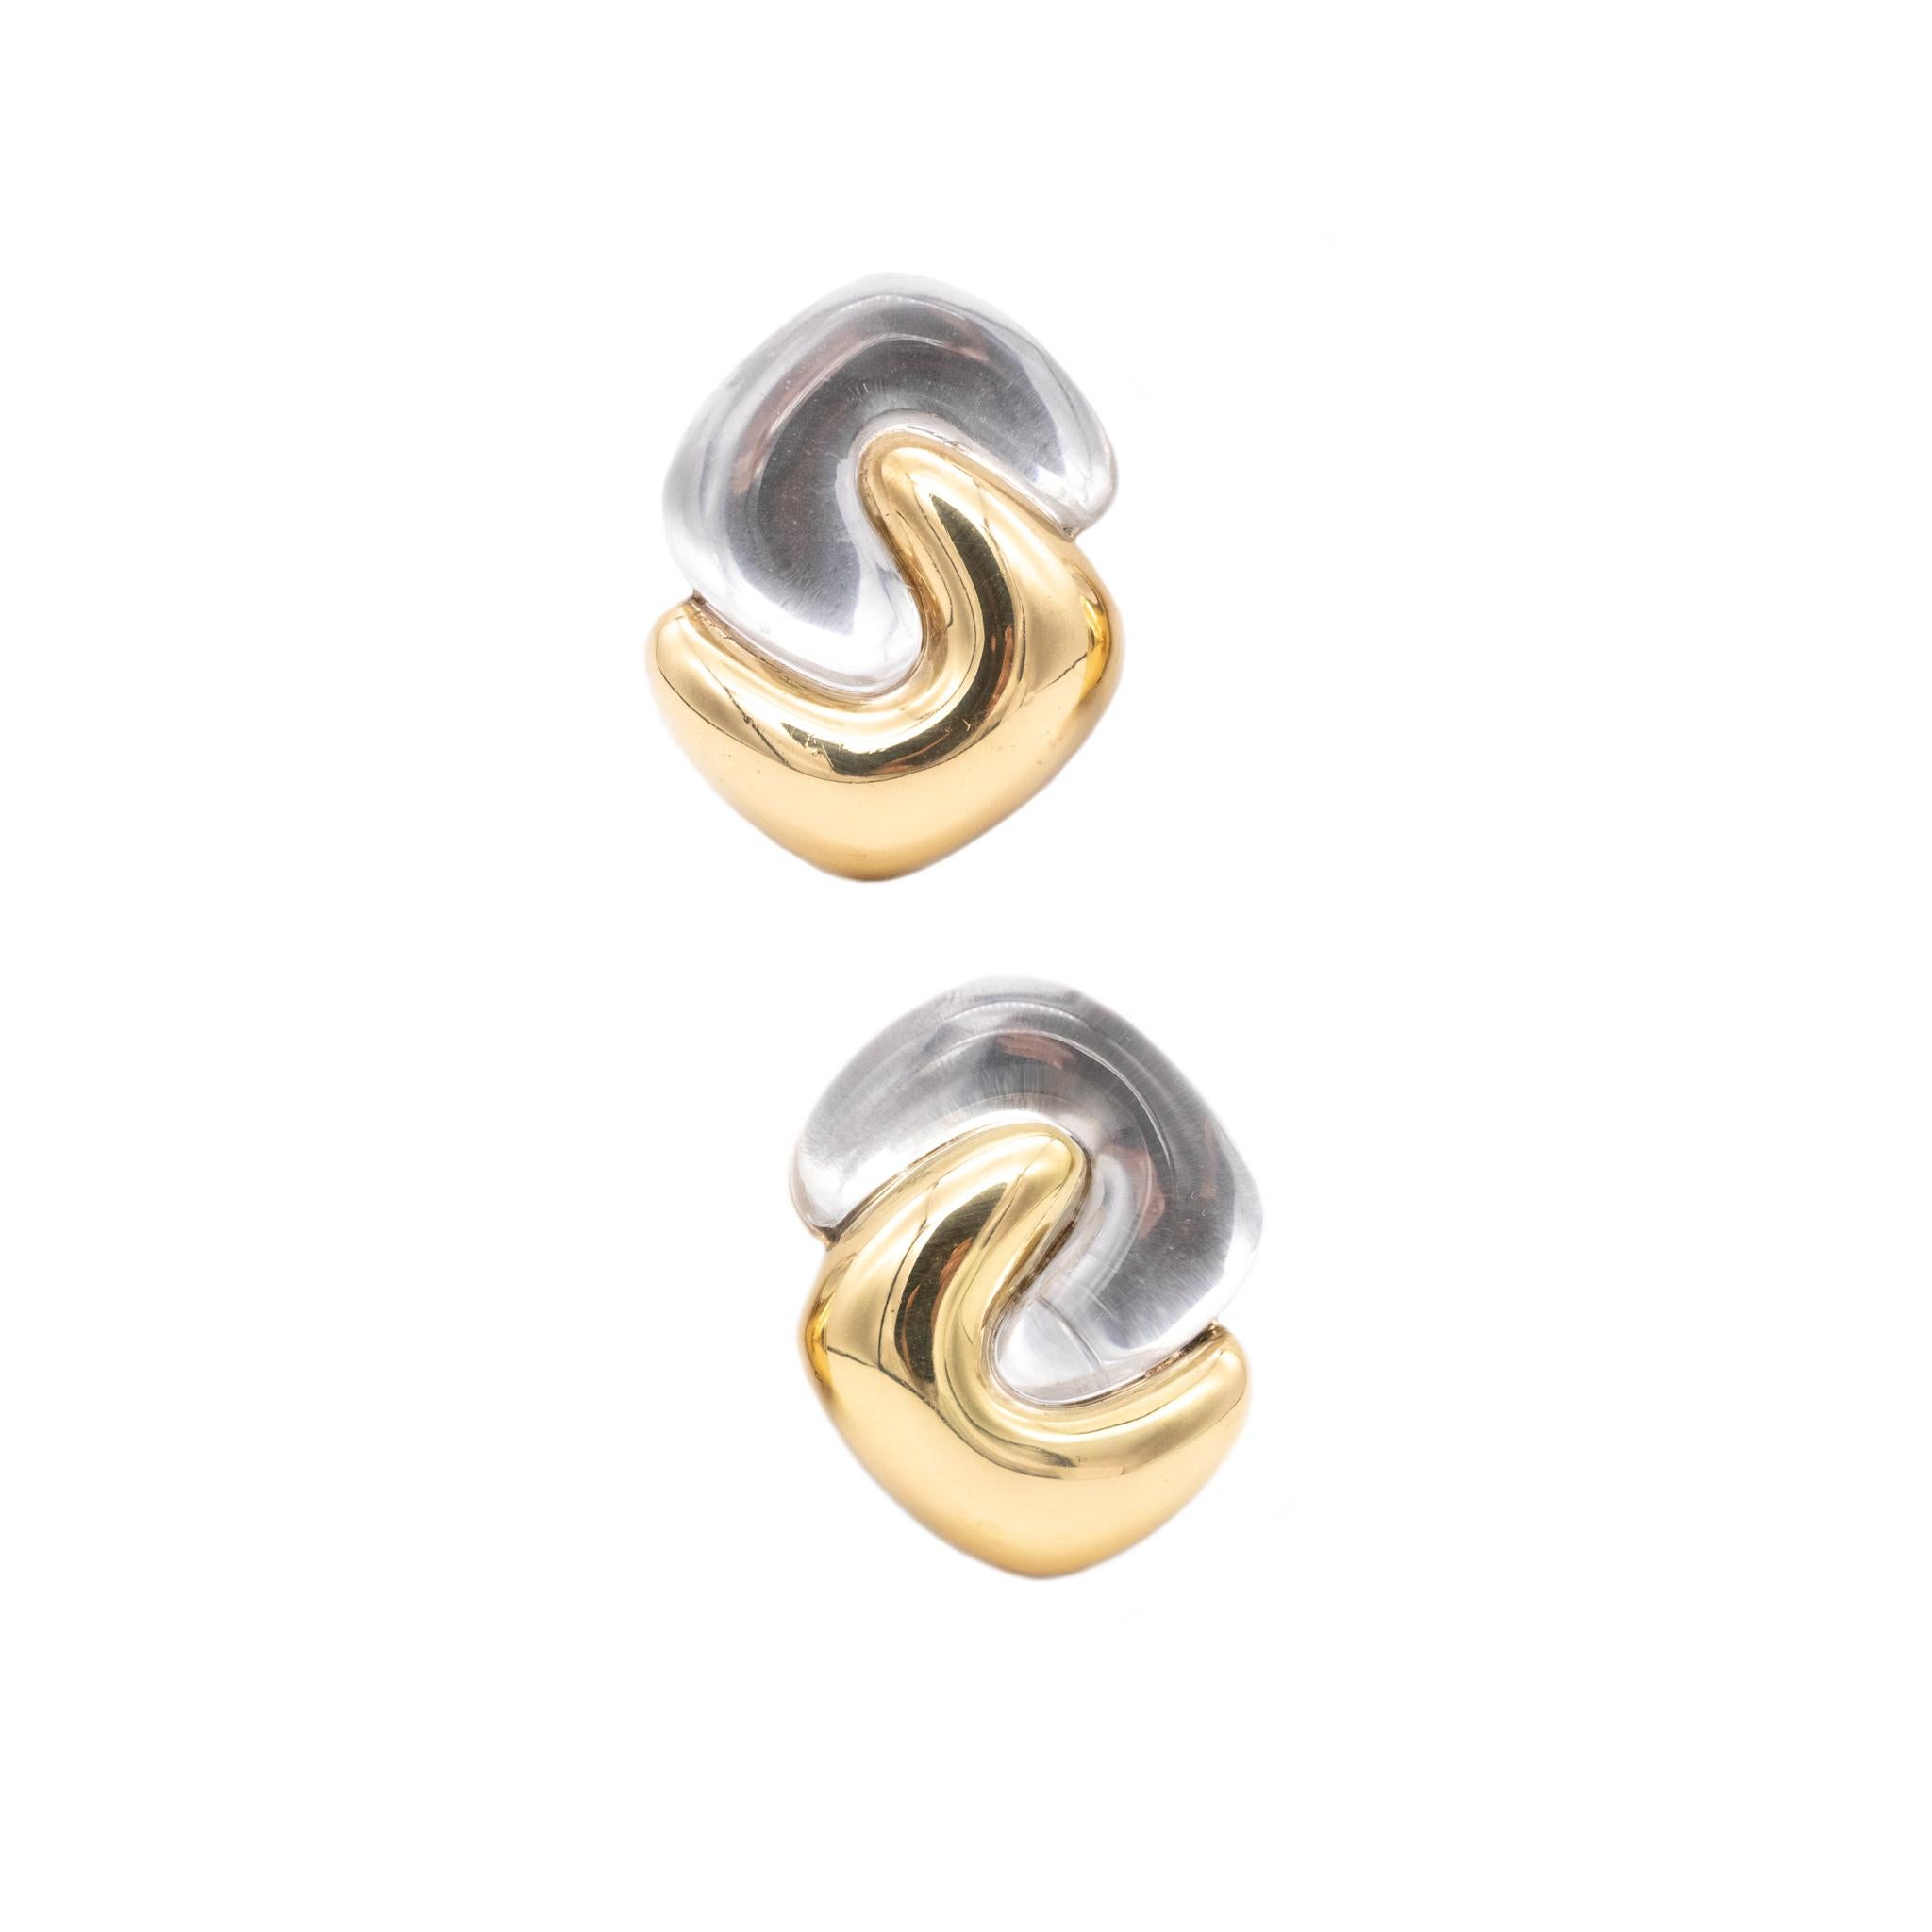 Beautiful pair of earrings designed by Valentin Magro.

A modern sculptural pair, crafted in solid 18 karats of high polished yellow gold. They are conceived as a mirrored pair and suited with posts for pierced ears (removable) and hinged omega